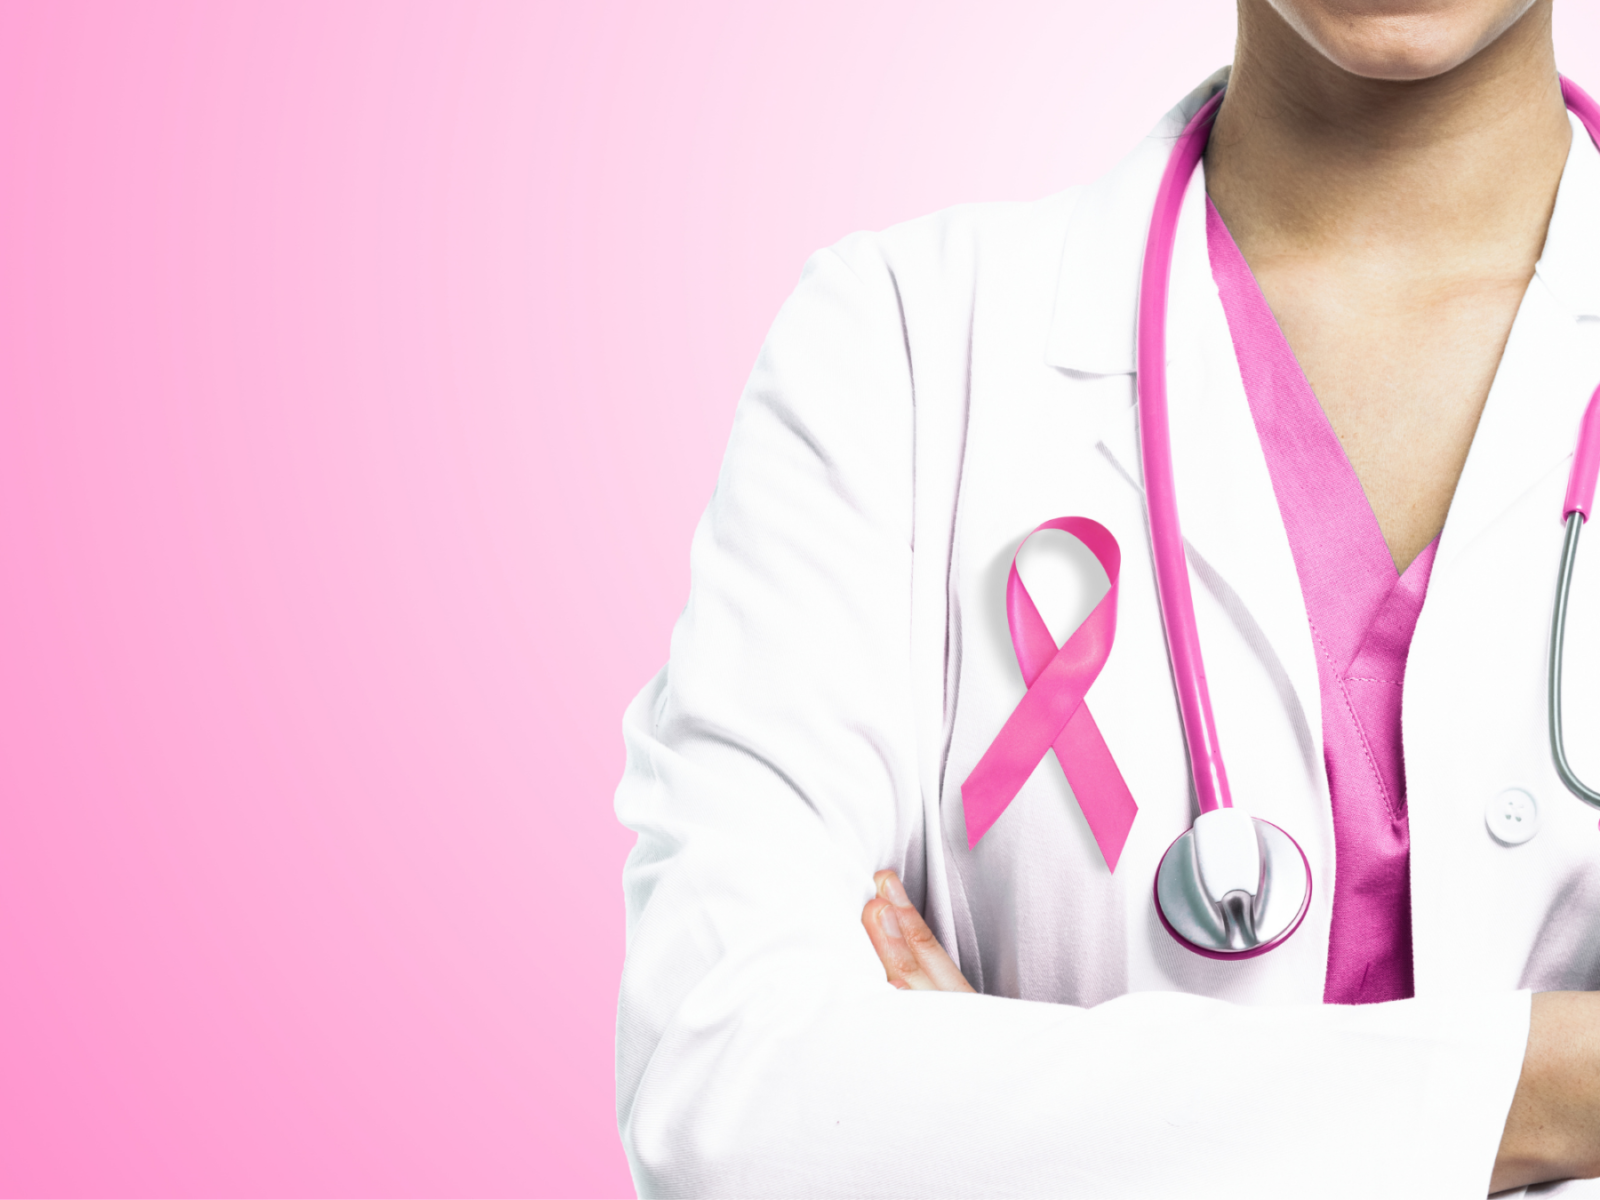 Breast cancer treatment linked to increased risk of cardiovascular disease